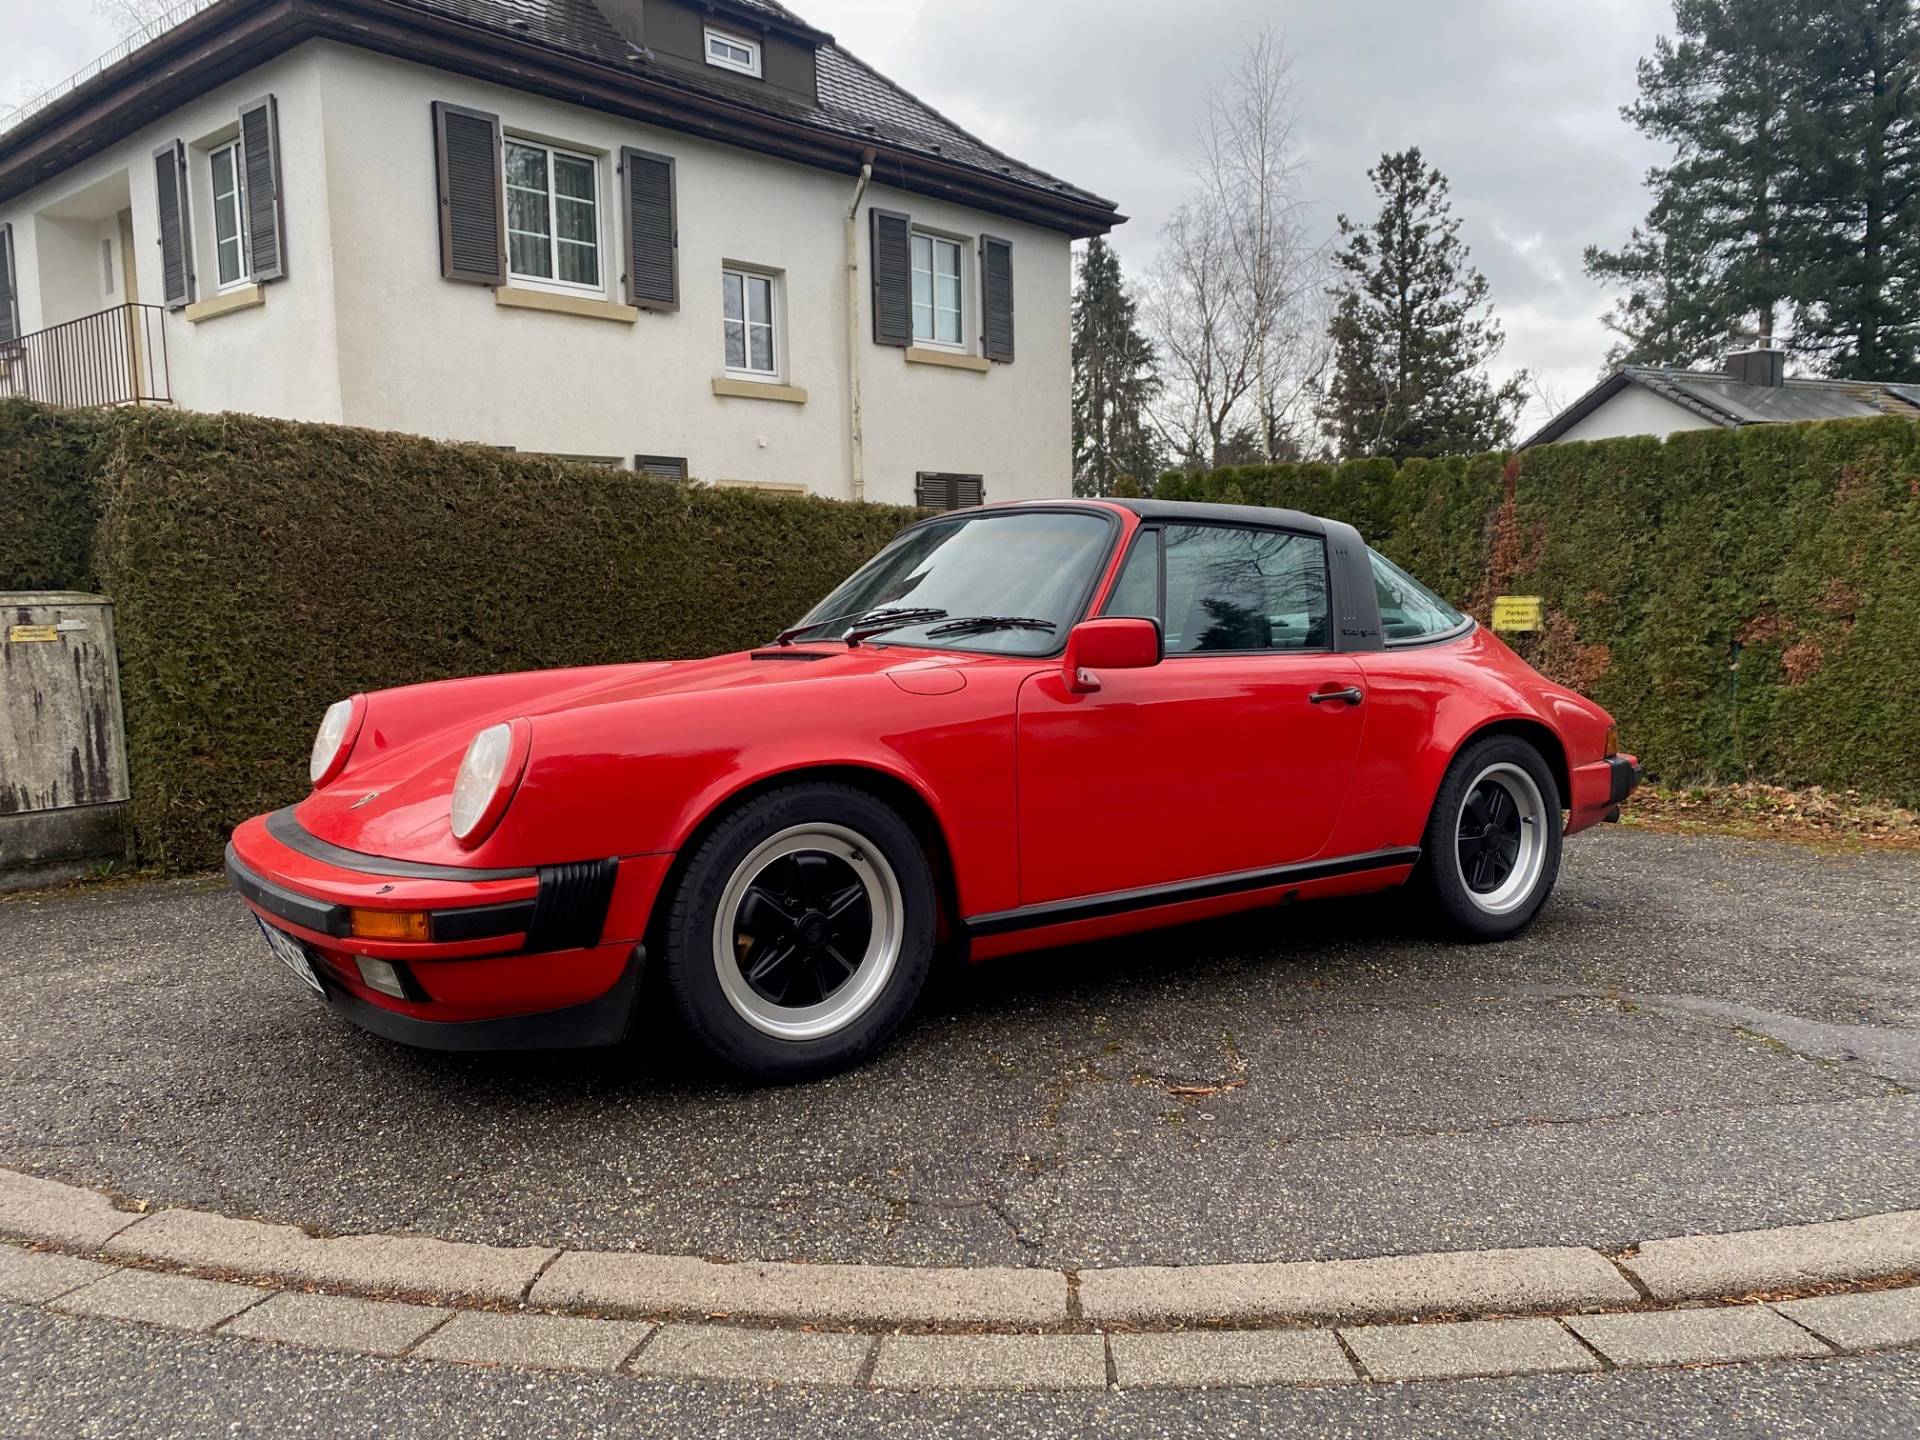 For Sale: Porsche 911 Carrera  (1985) offered for GBP 58,749